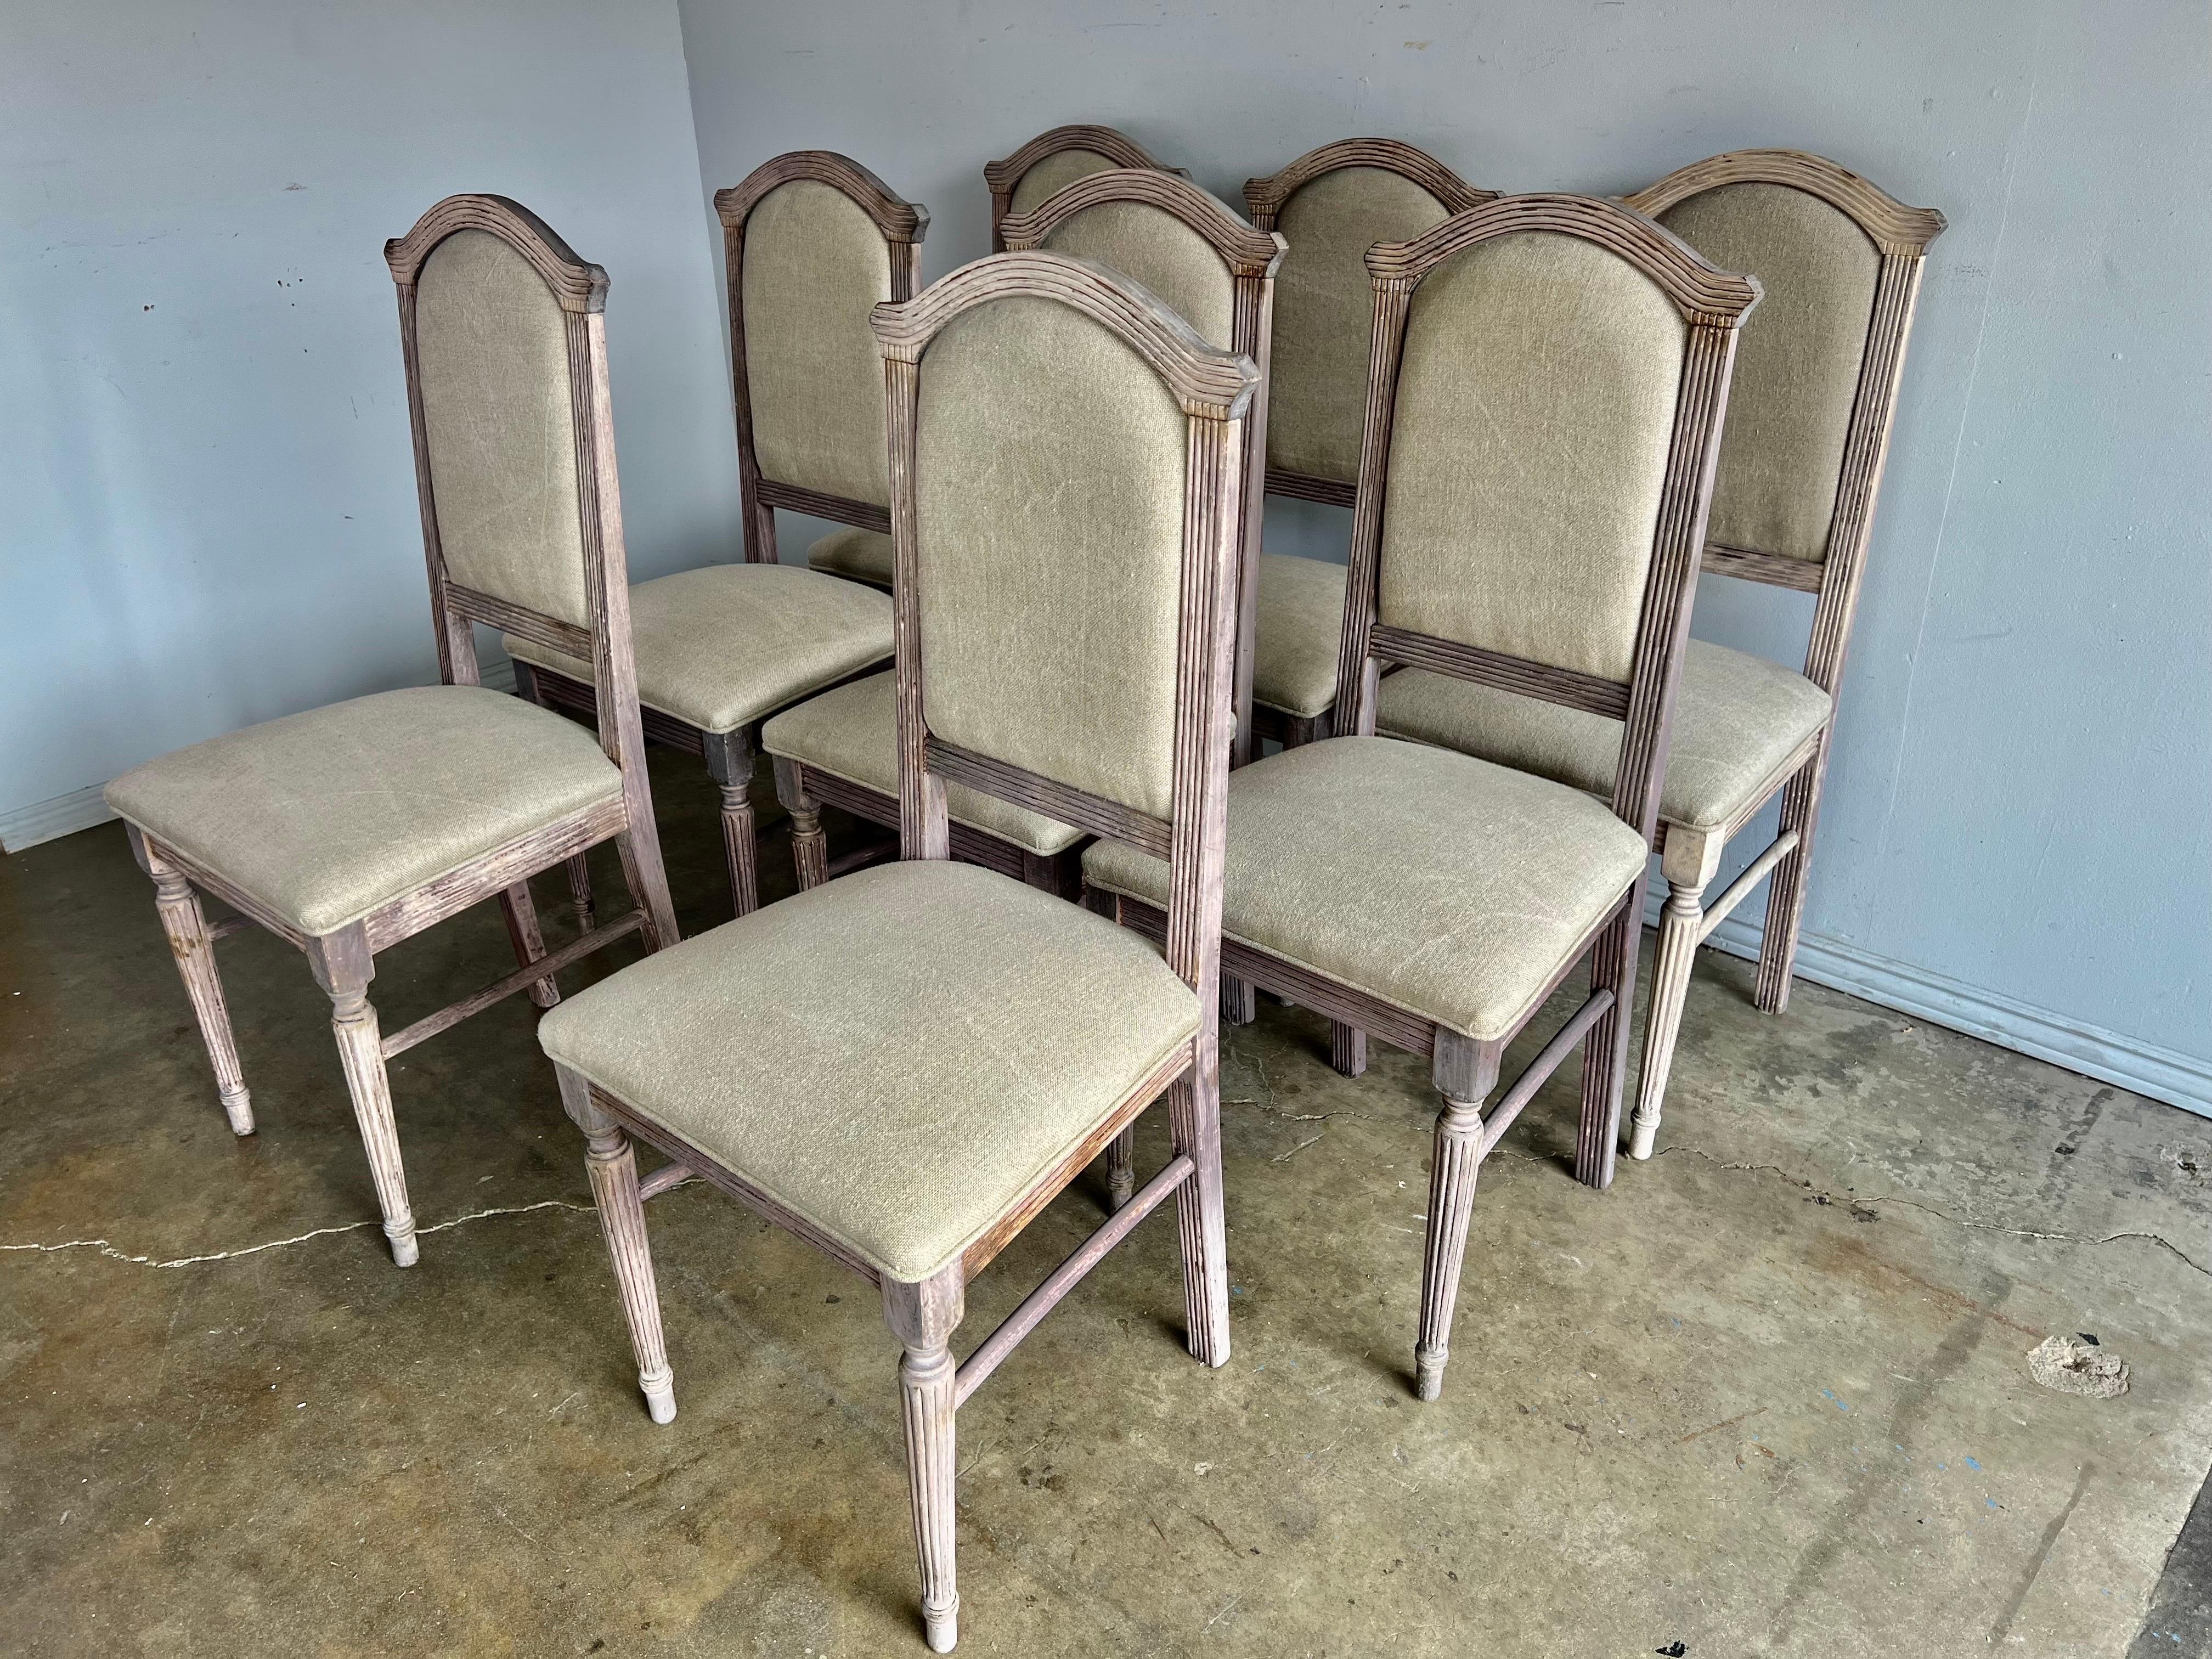 Set of eight bleached Italian Neoclassical style dining chairs. The chairs are newly upholstered in Belgium linen with a self cord detail.